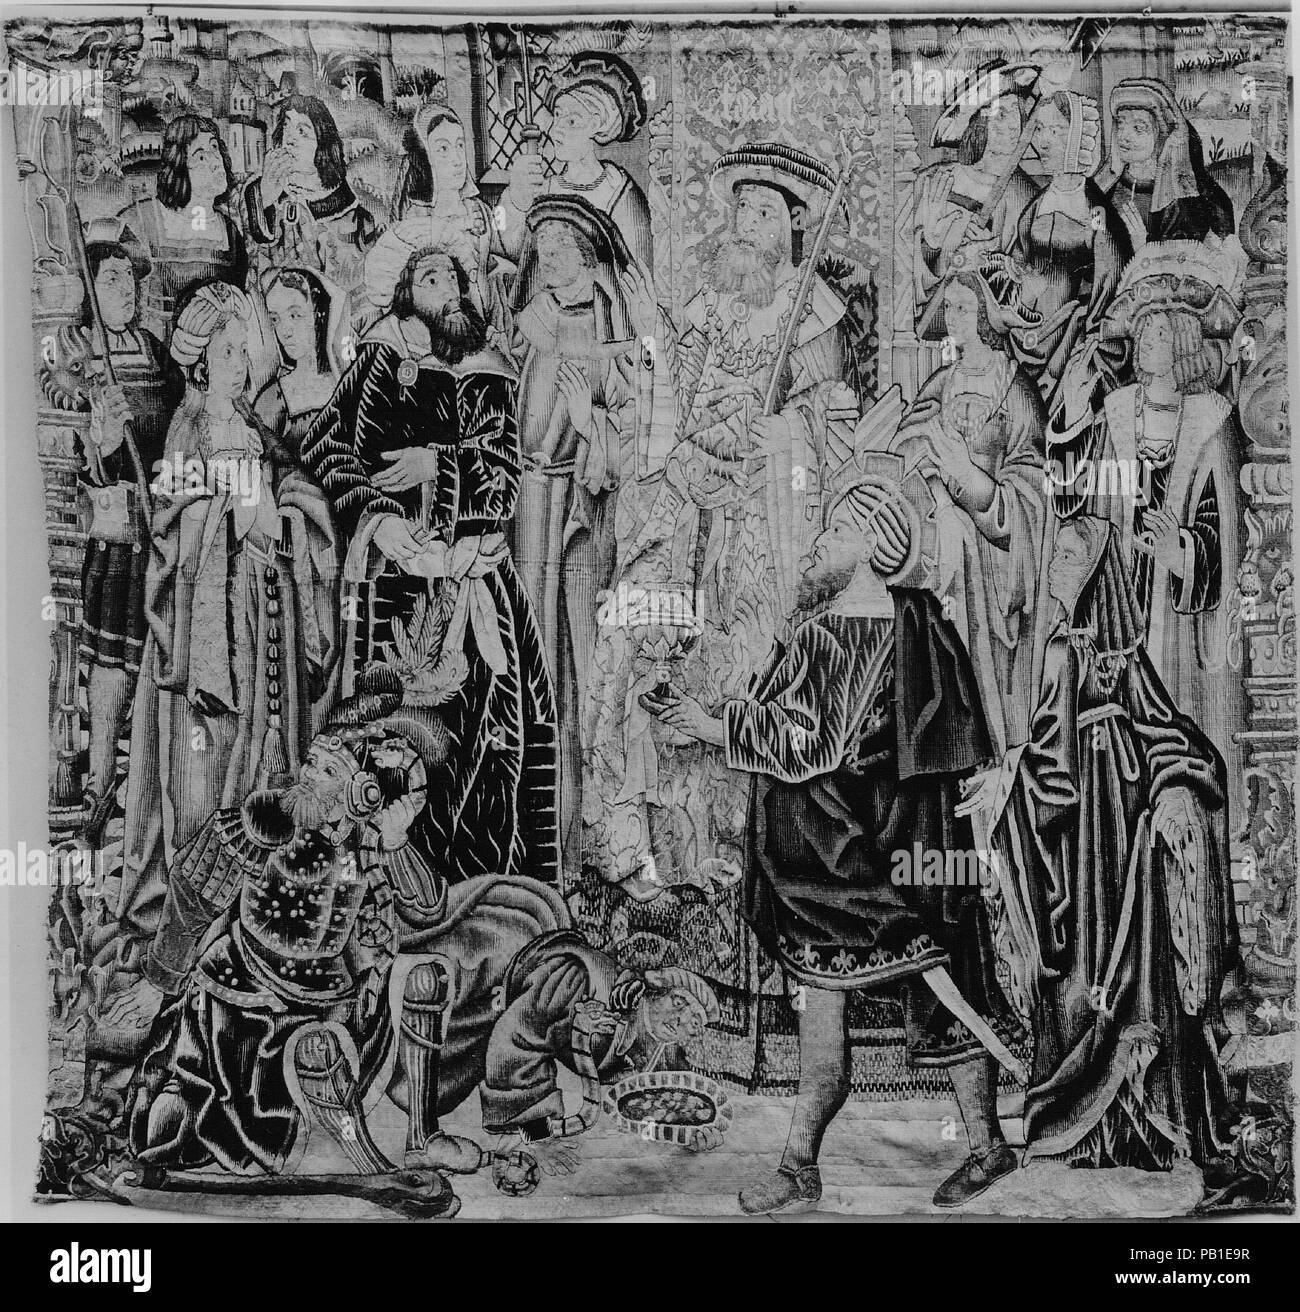 Moses and Aaron Before Pharaoh. Culture: South Netherlandish. Dimensions: Overall: 109 x 197in. (276.9 x 500.4cm). Date: ca. 1515-30. Museum: Metropolitan Museum of Art, New York, USA. Stock Photo